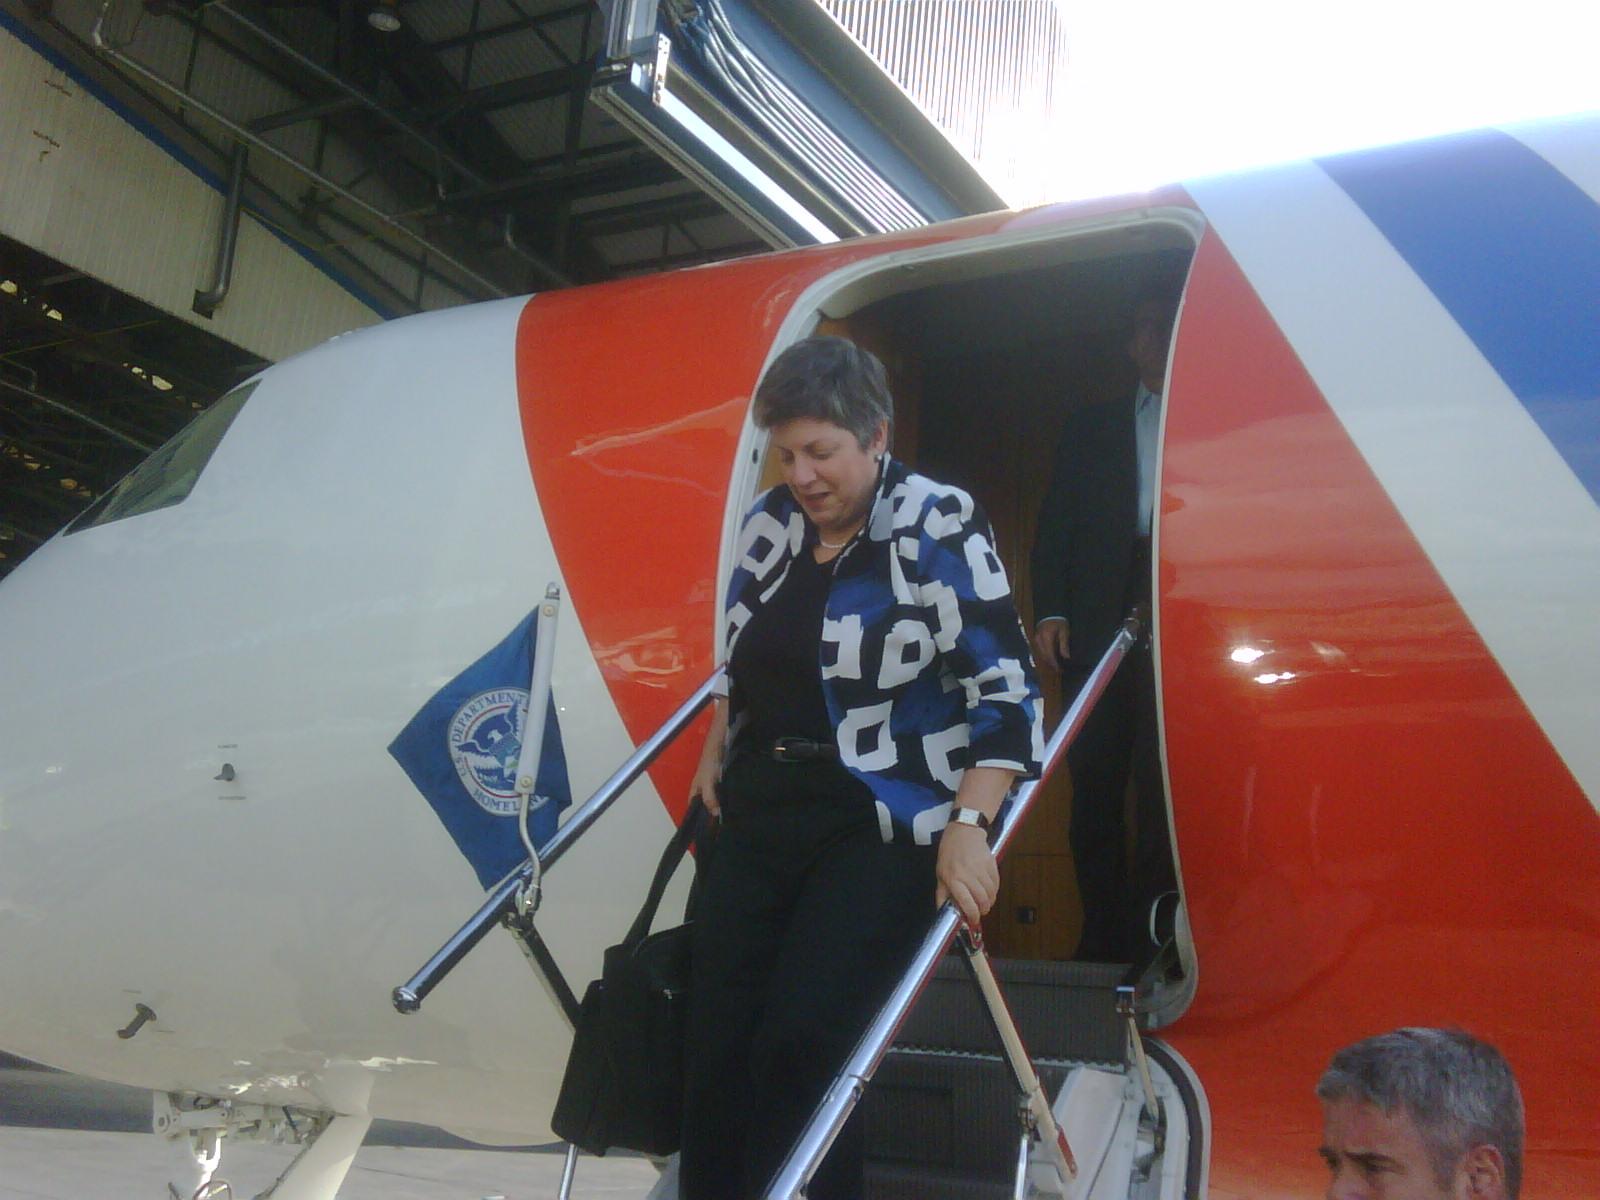 Secretary Napolitano touched down moments ago in Shannon, Ireland, kicking off her European trip.